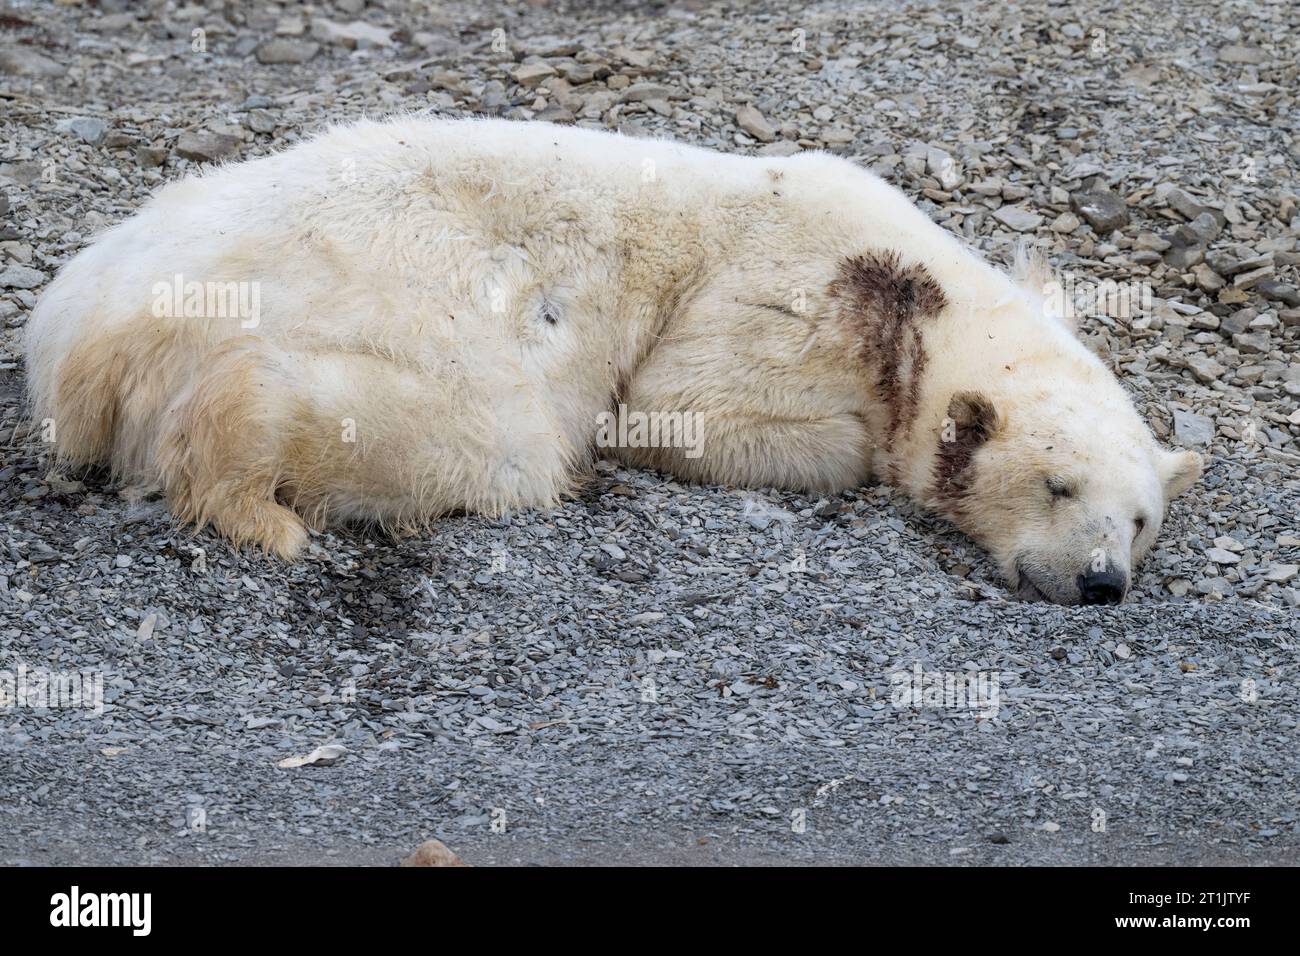 Canada, Nunavut, Coningham Bay. Dead polar bear that has been shot in the head and neck. Stock Photo